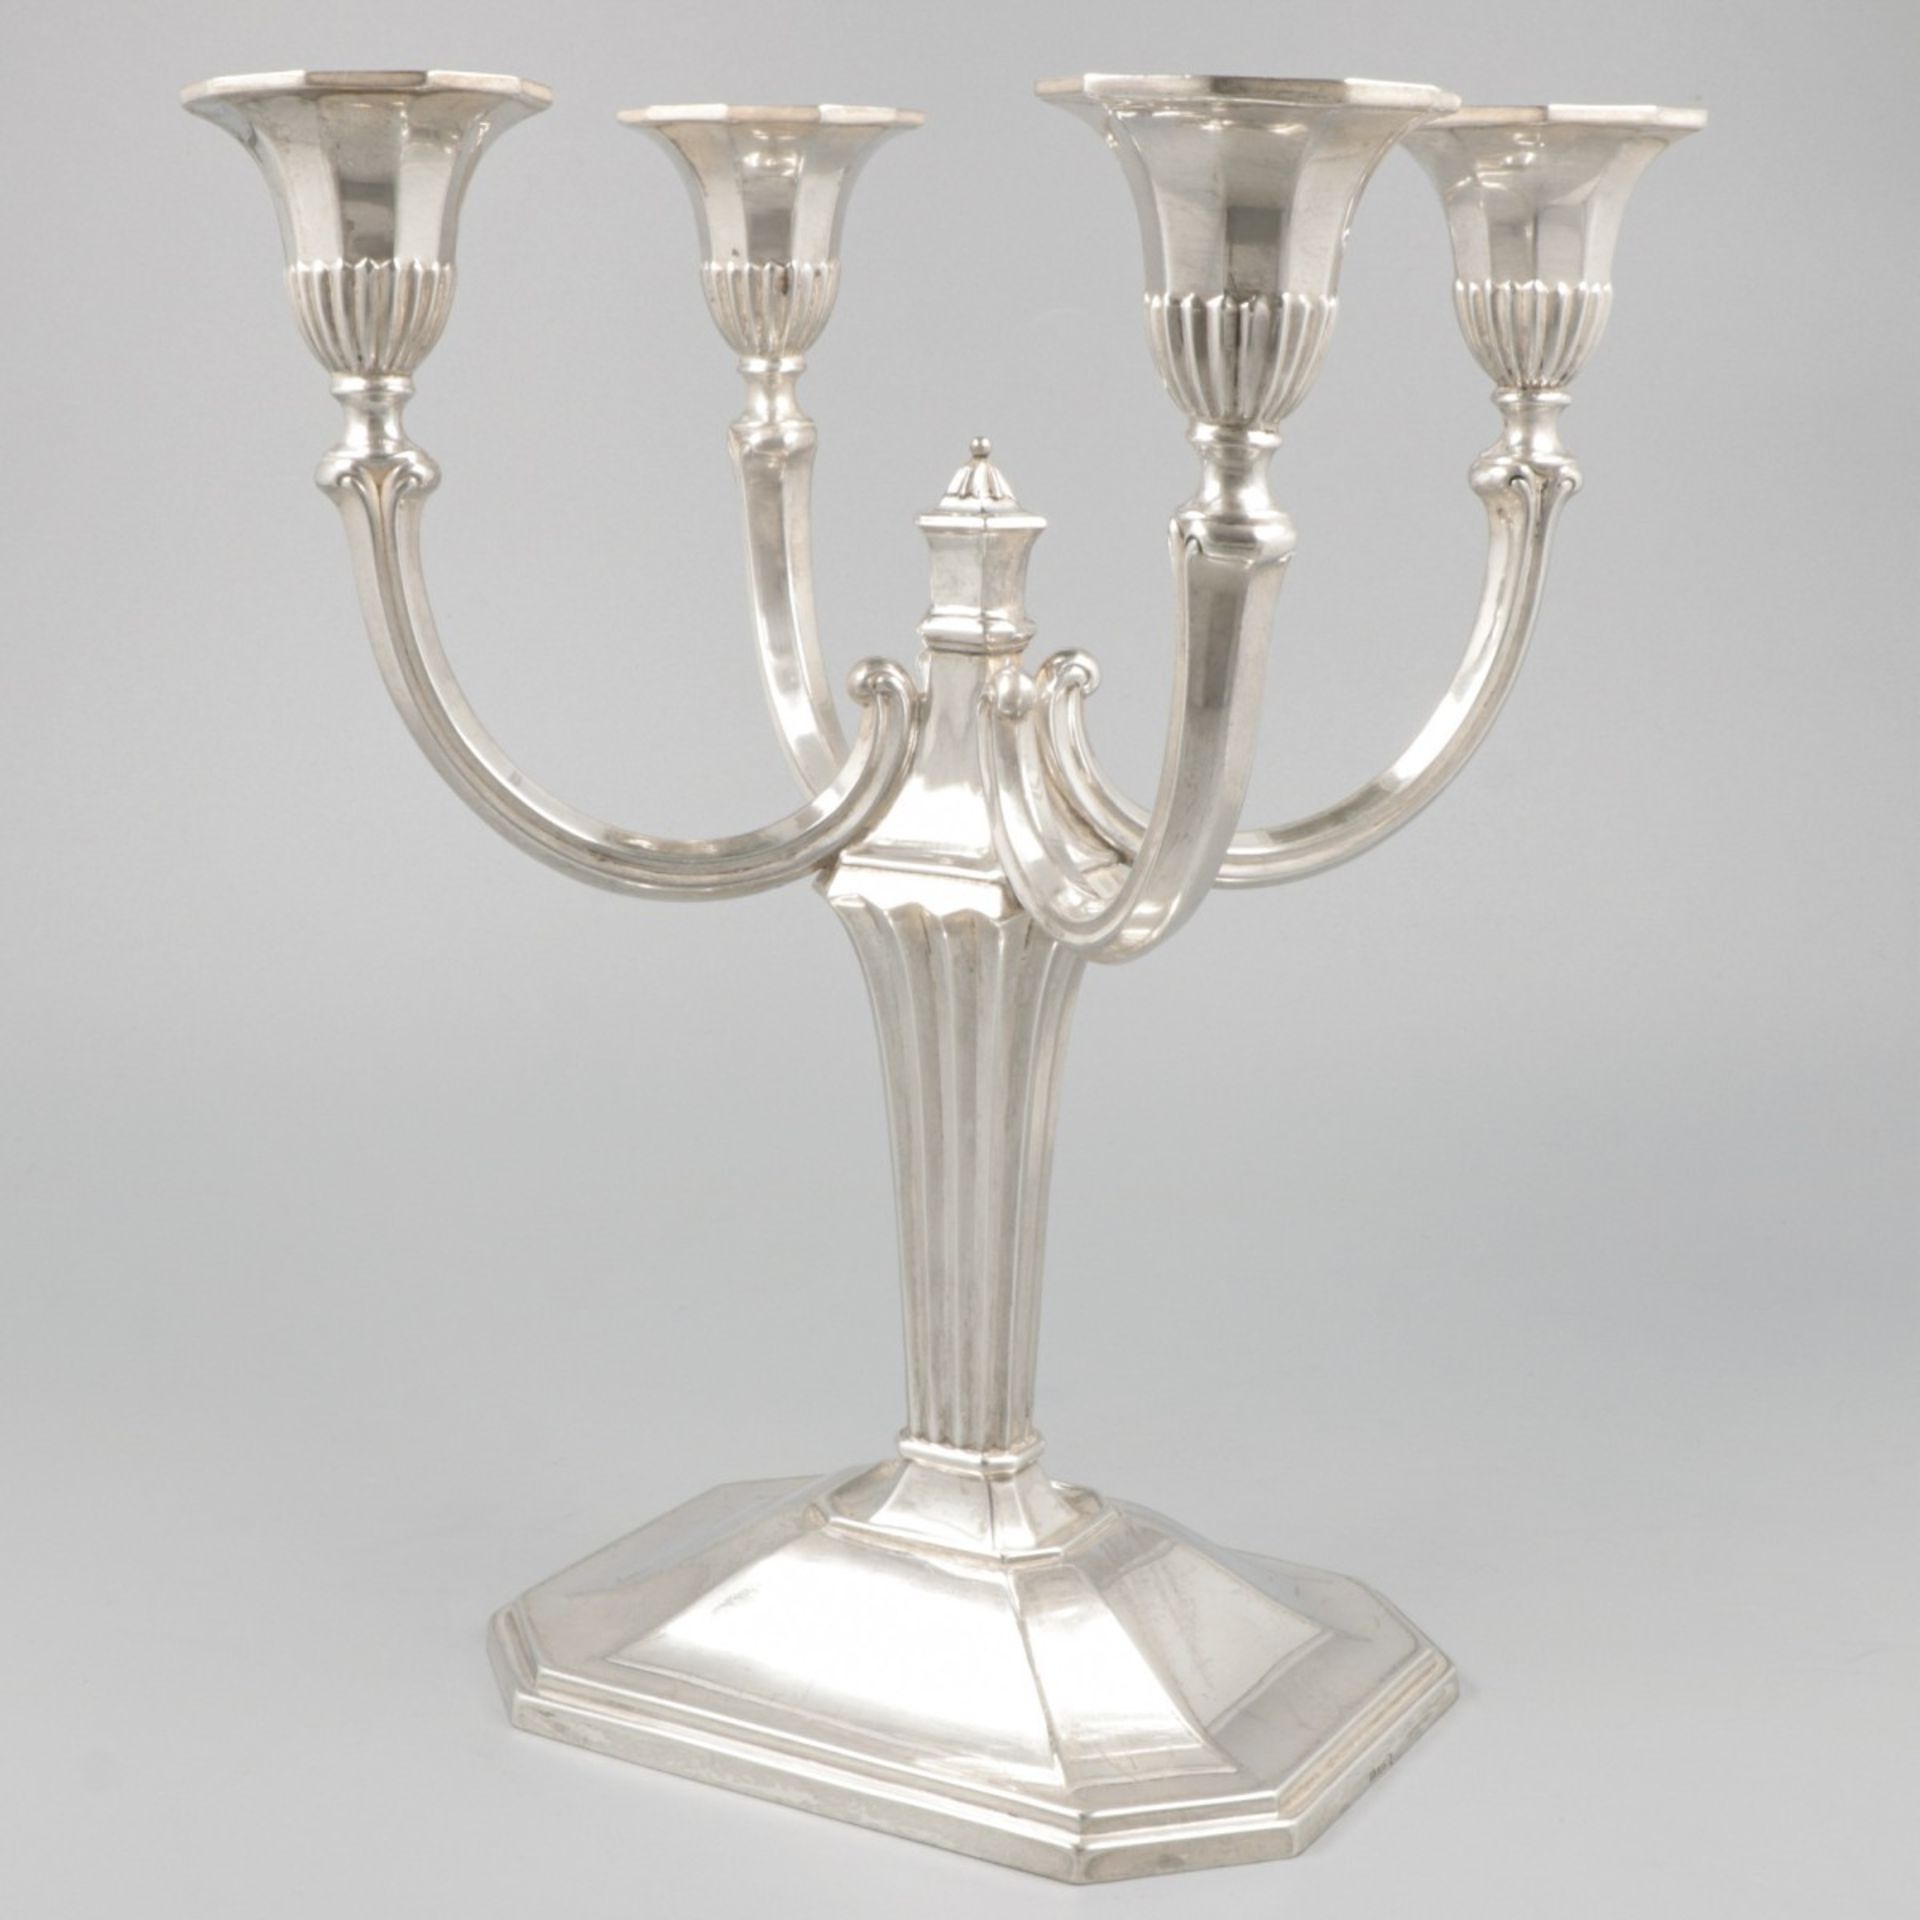 2-piece set of candlesticks silver. - Image 3 of 8